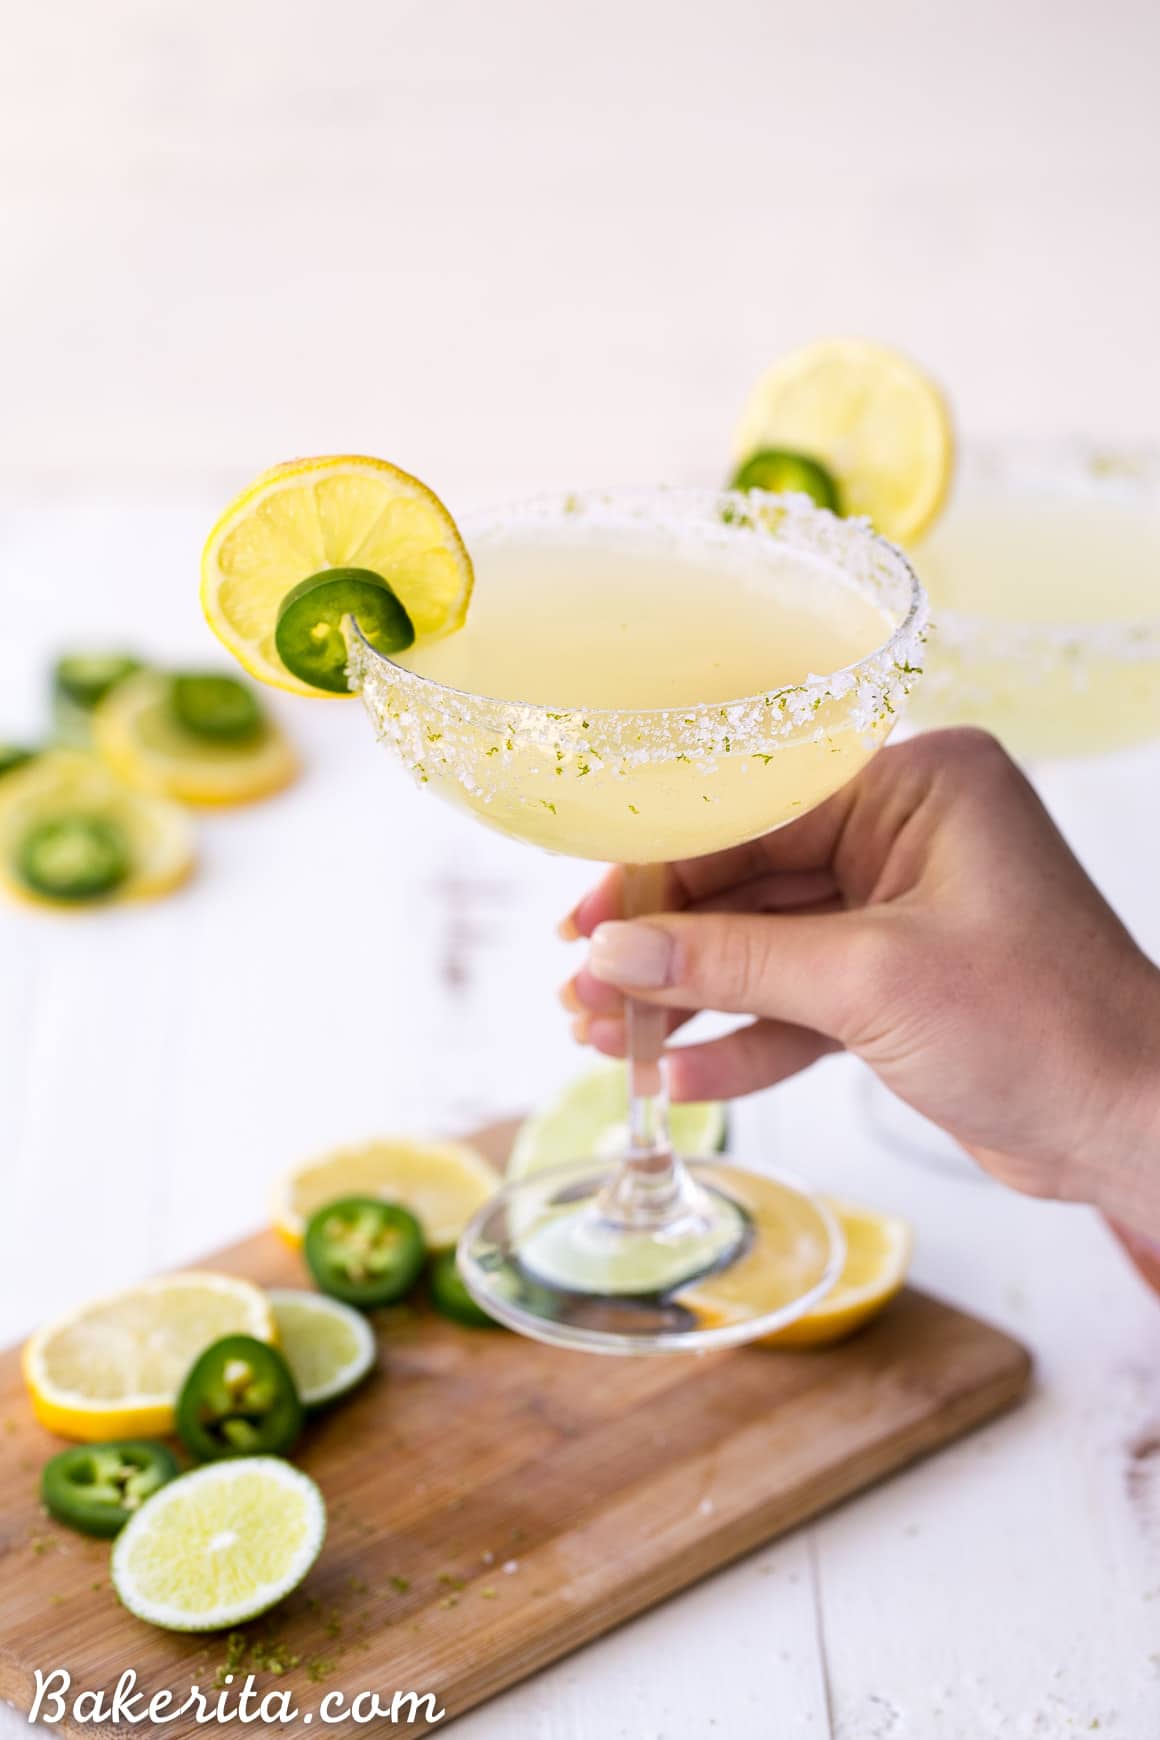 This Pacific Rim Margarita is a refreshing, tropical drink that you'll love sipping on! It's flavored with citrus and has a spicy coconut twist. Enjoy responsibly!